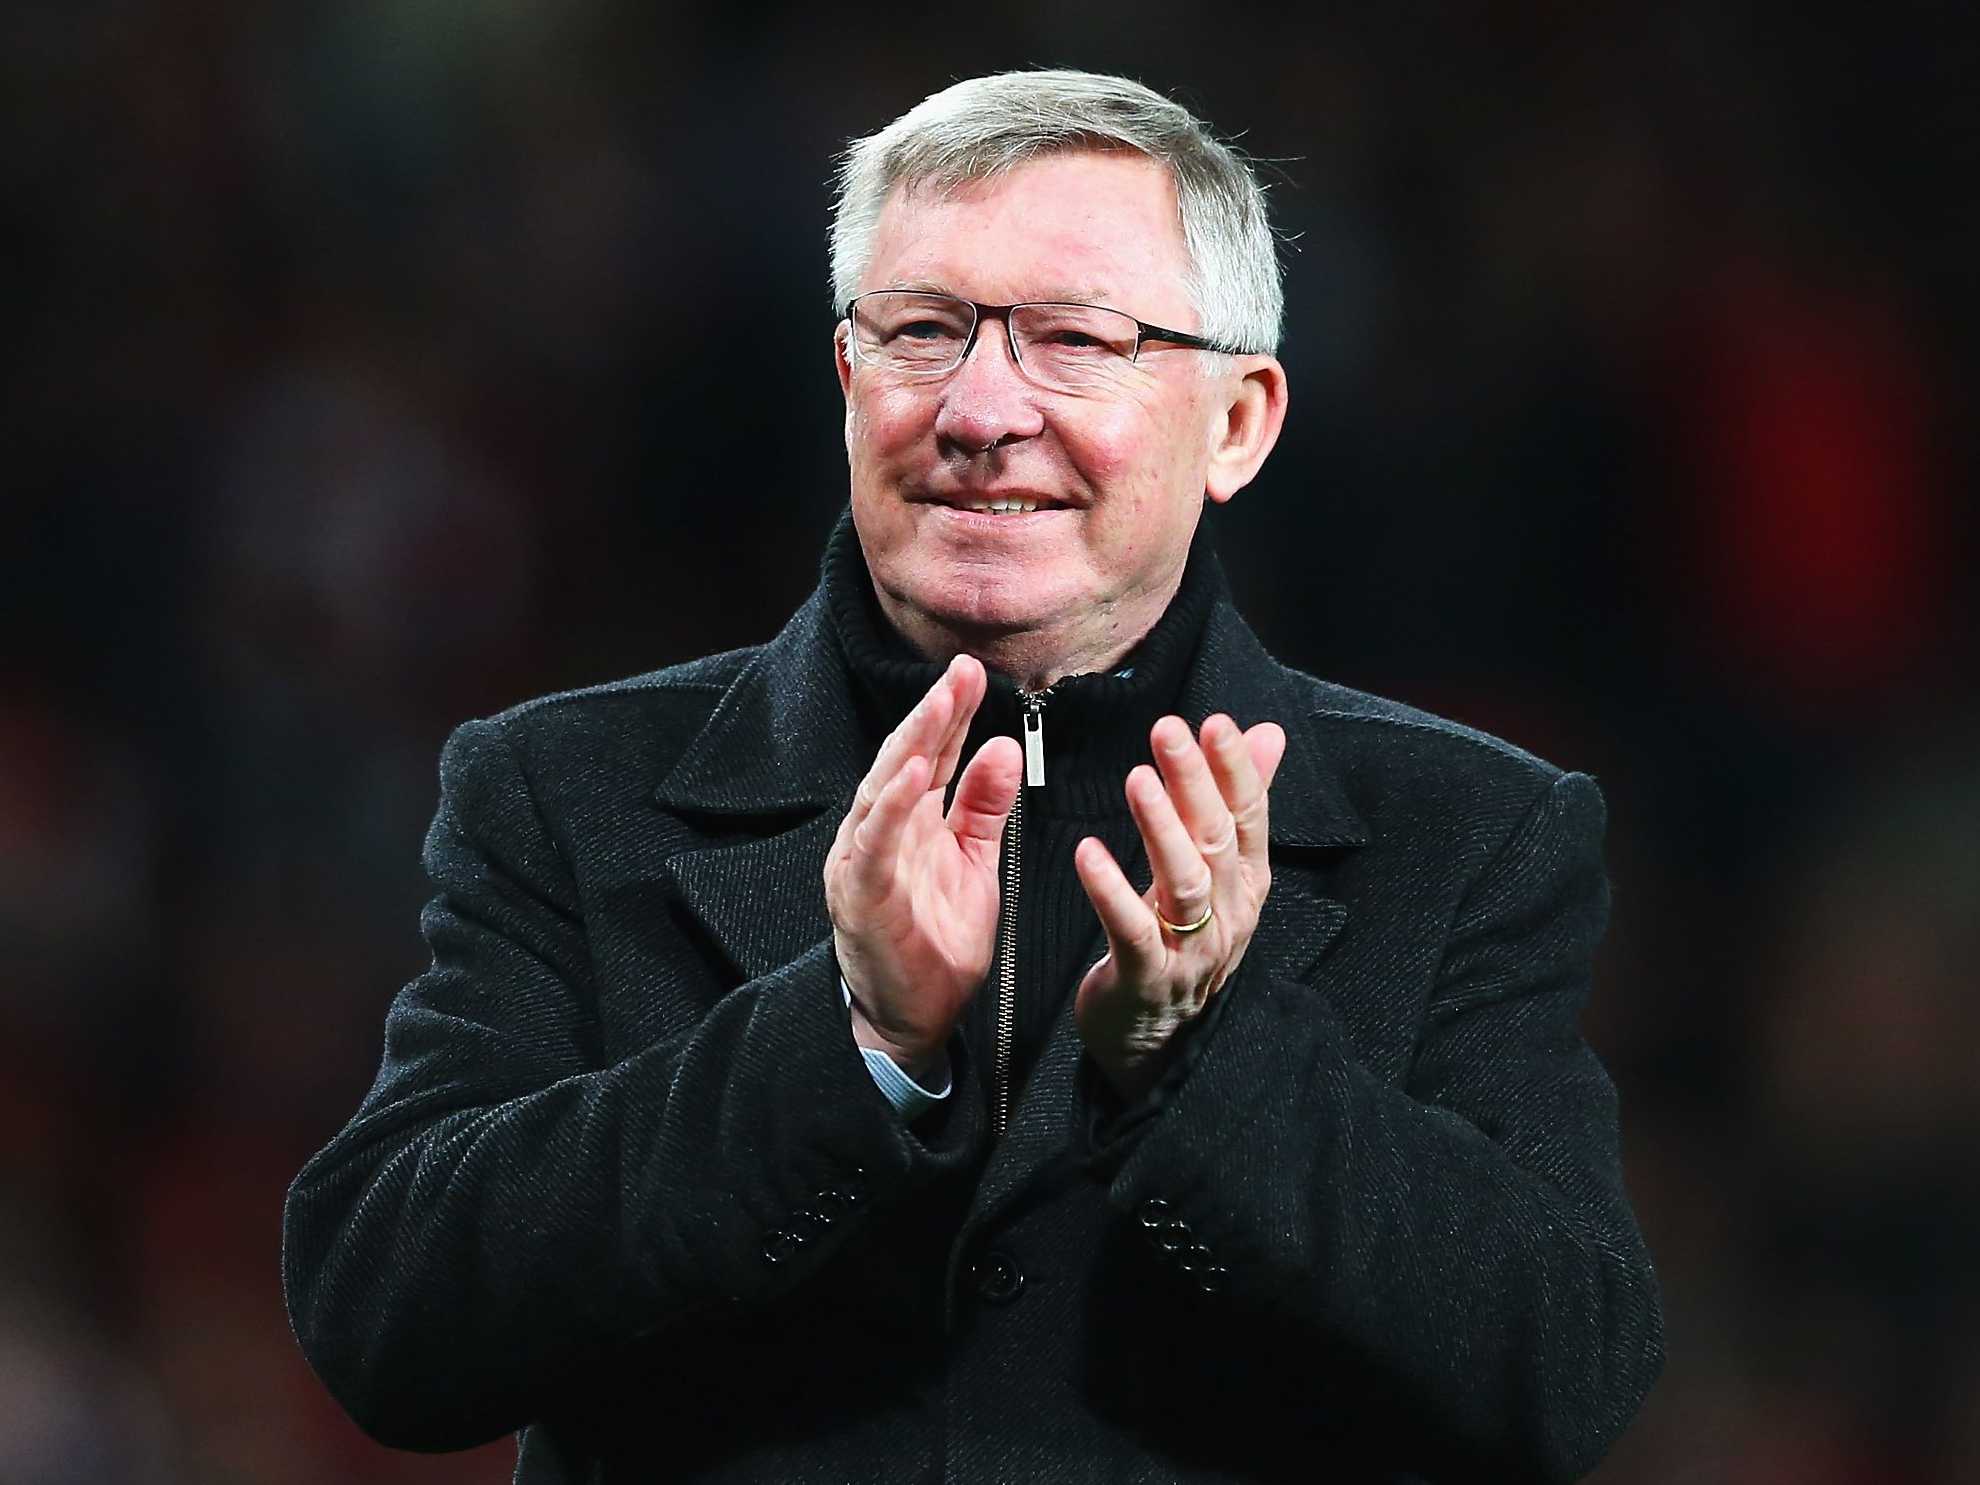 Sir Alex Ferguson is the greatest manager in the history of Manchester United in the past several decades.